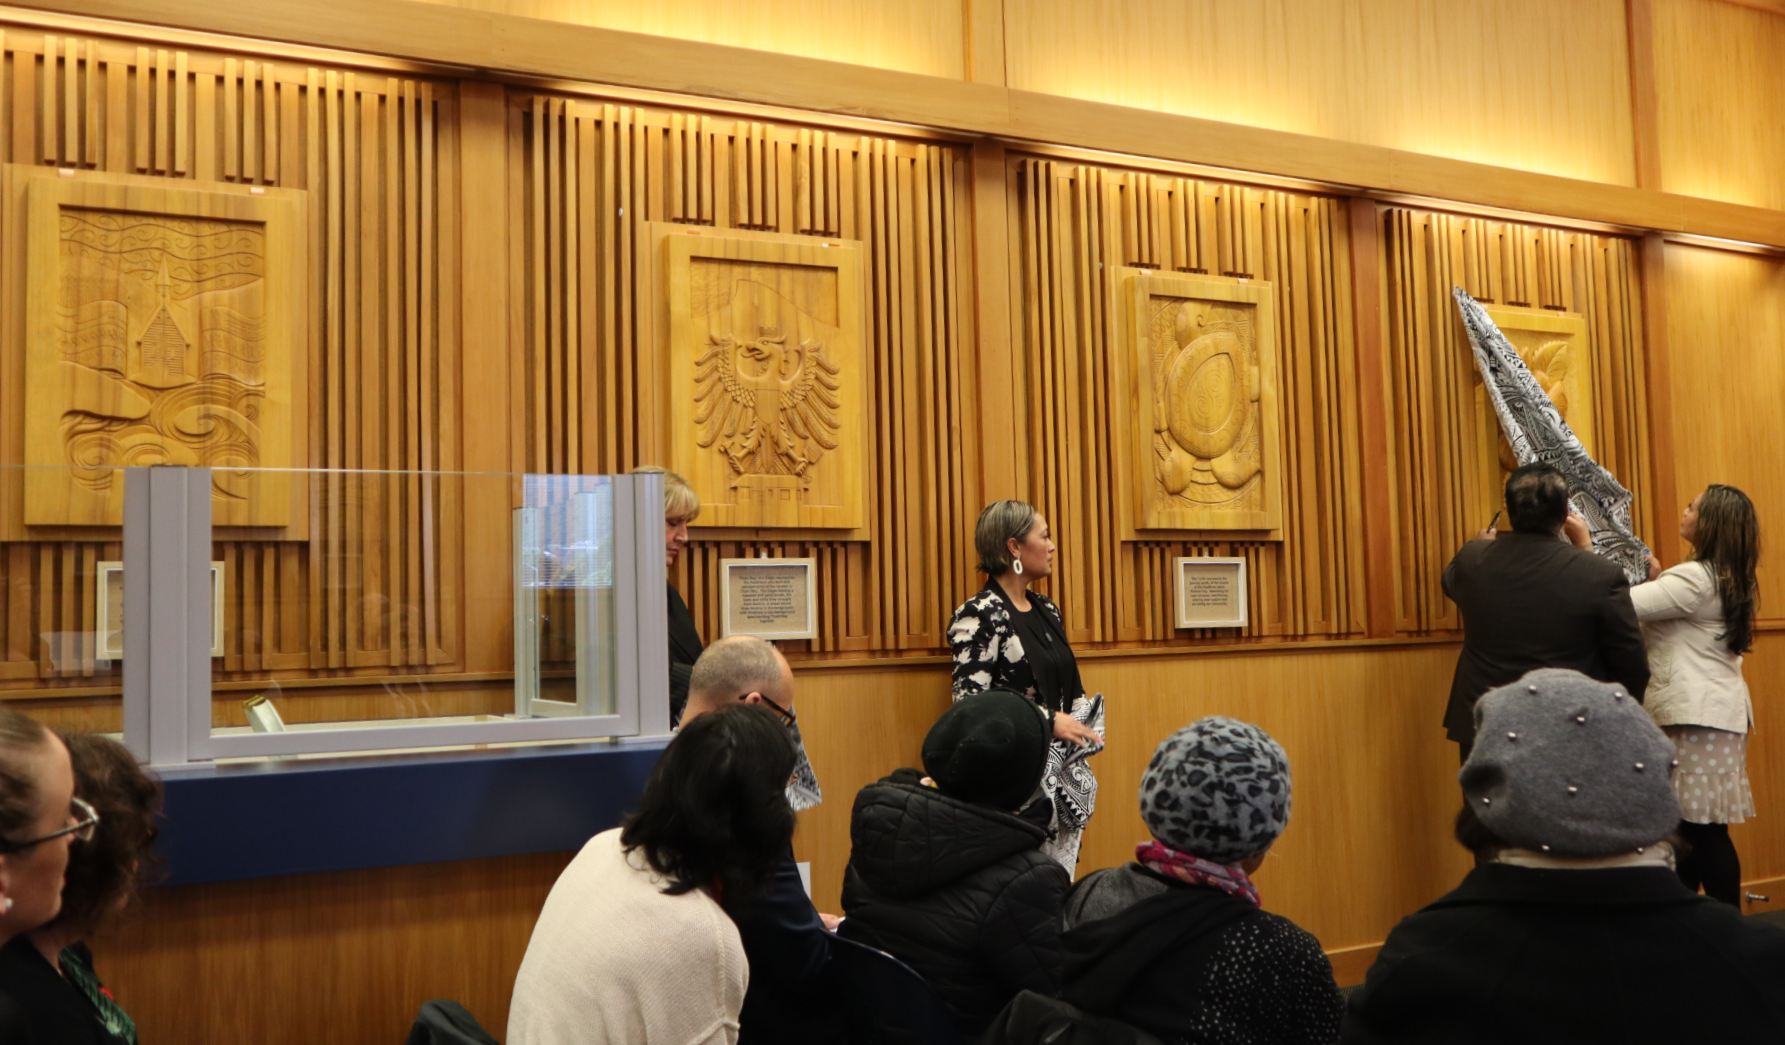 Image of unveiling of a panel in the set of carved panels by local carer Hermann Salzmann.